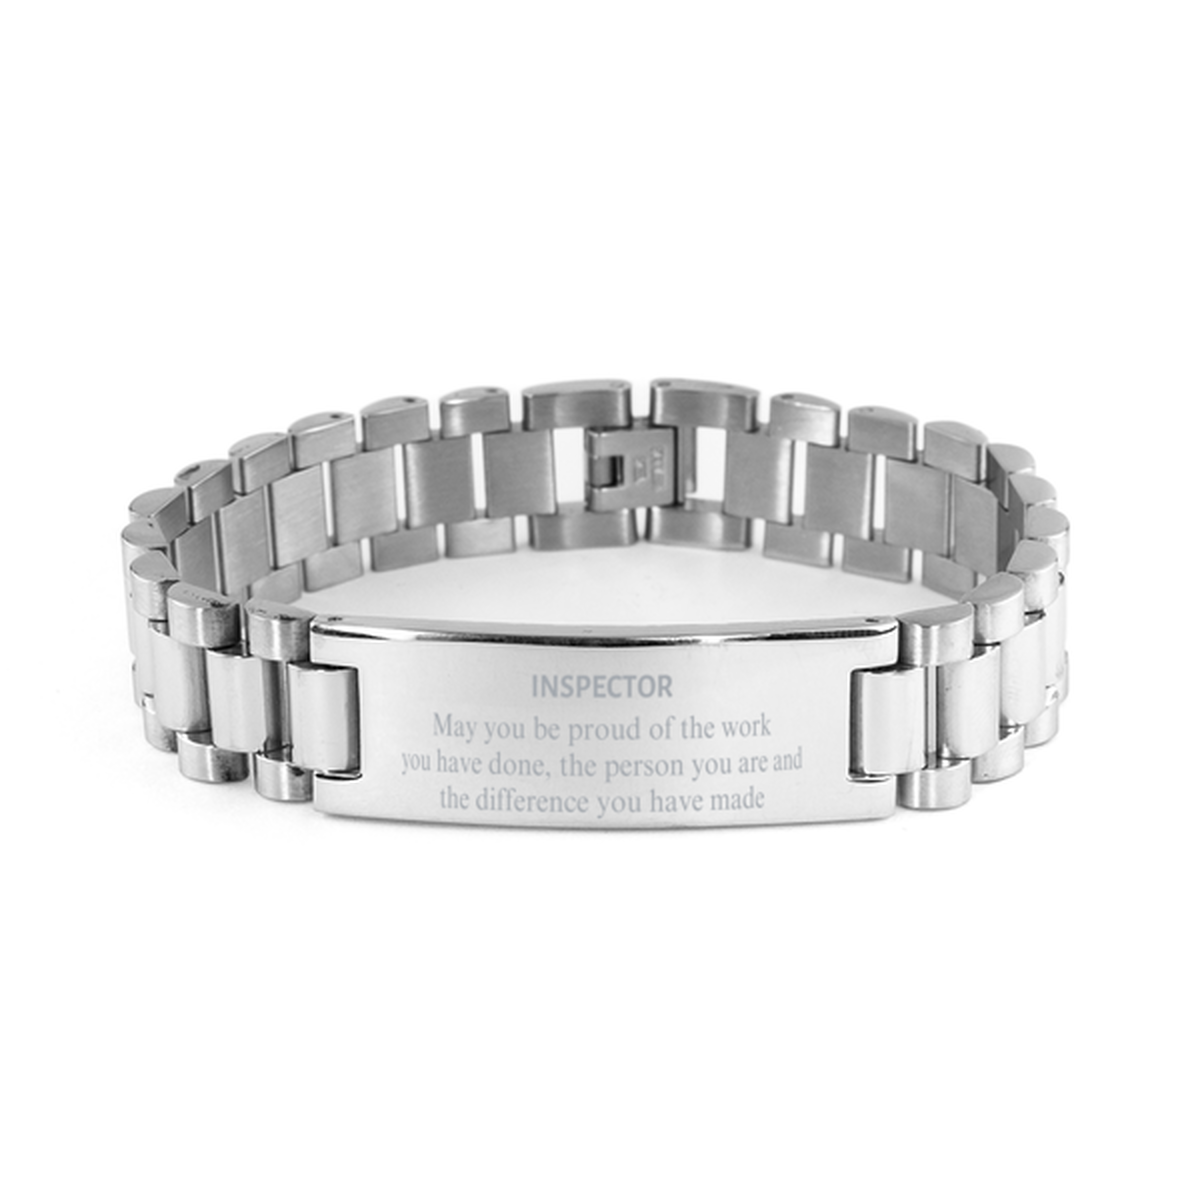 Inspector May you be proud of the work you have done, Retirement Inspector Ladder Stainless Steel Bracelet for Colleague Appreciation Gifts Amazing for Inspector